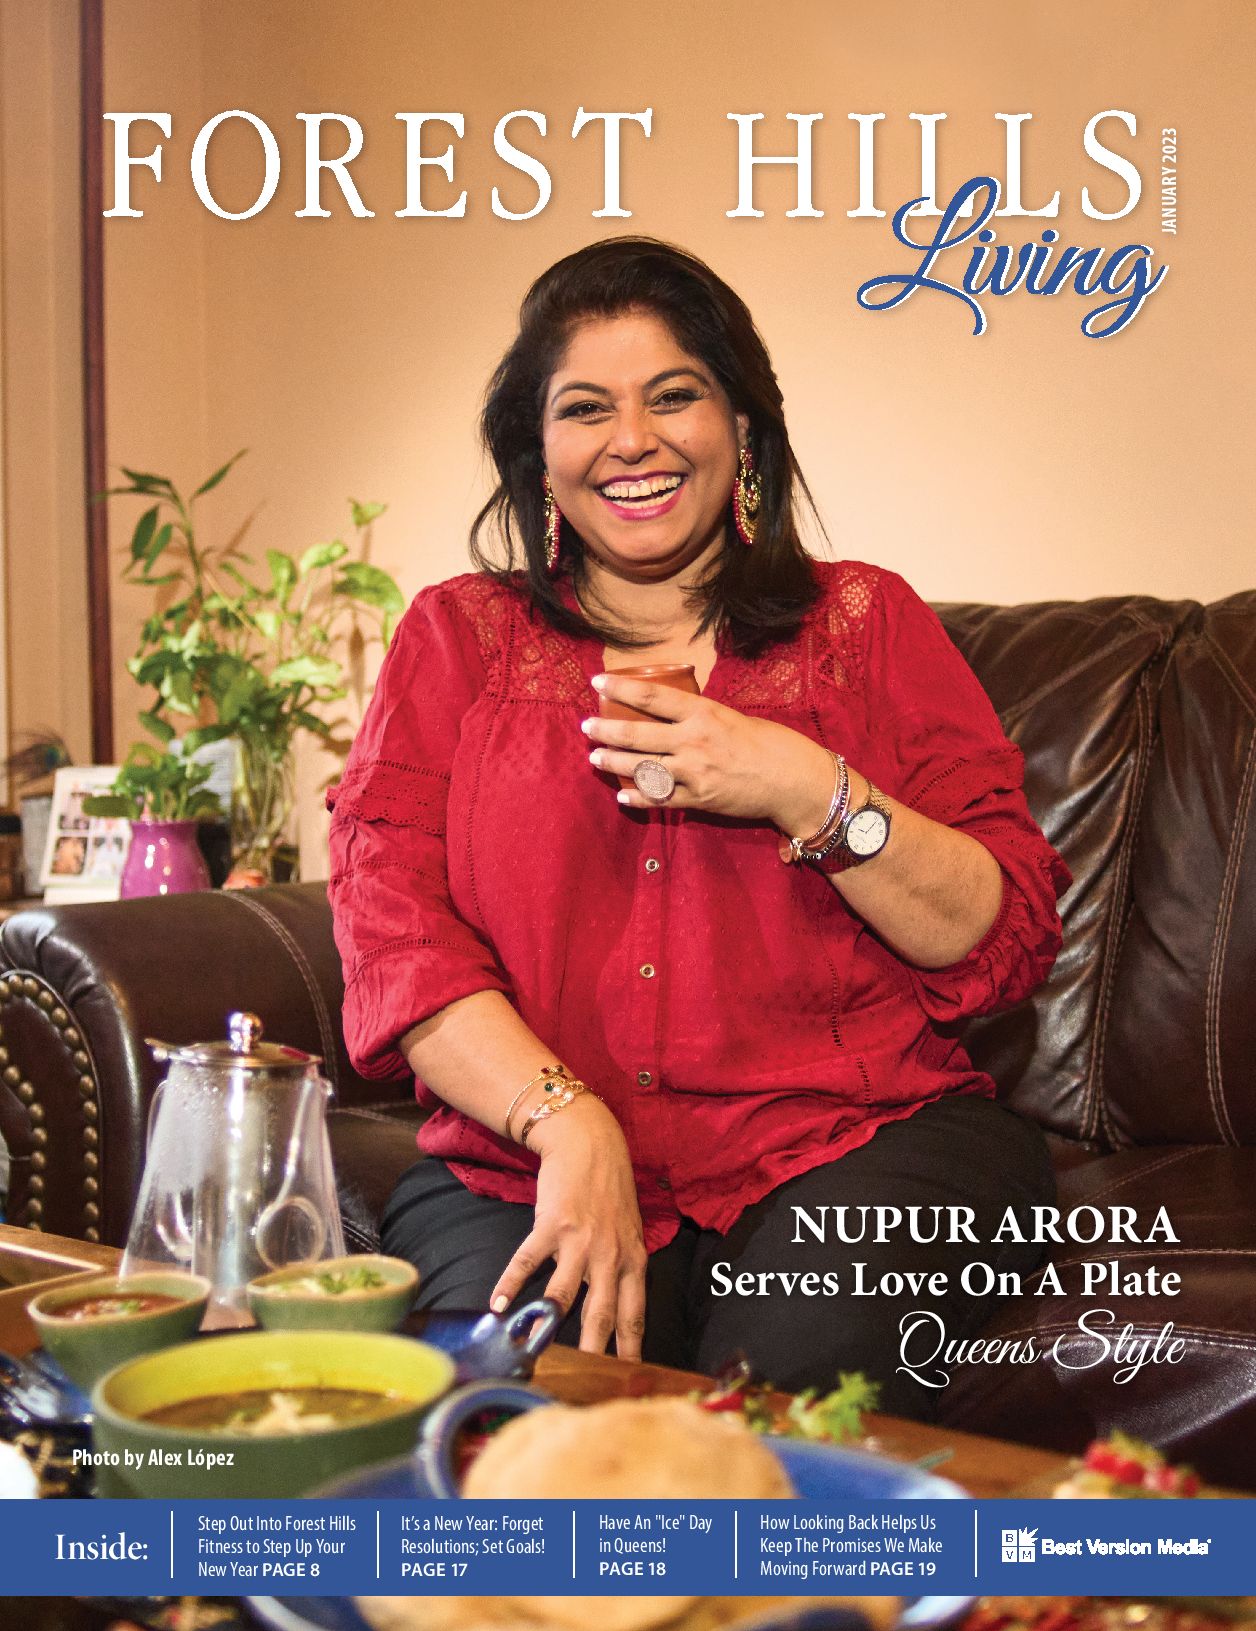 Cover image of Forest Hills Living magazine. Woman on couch. 